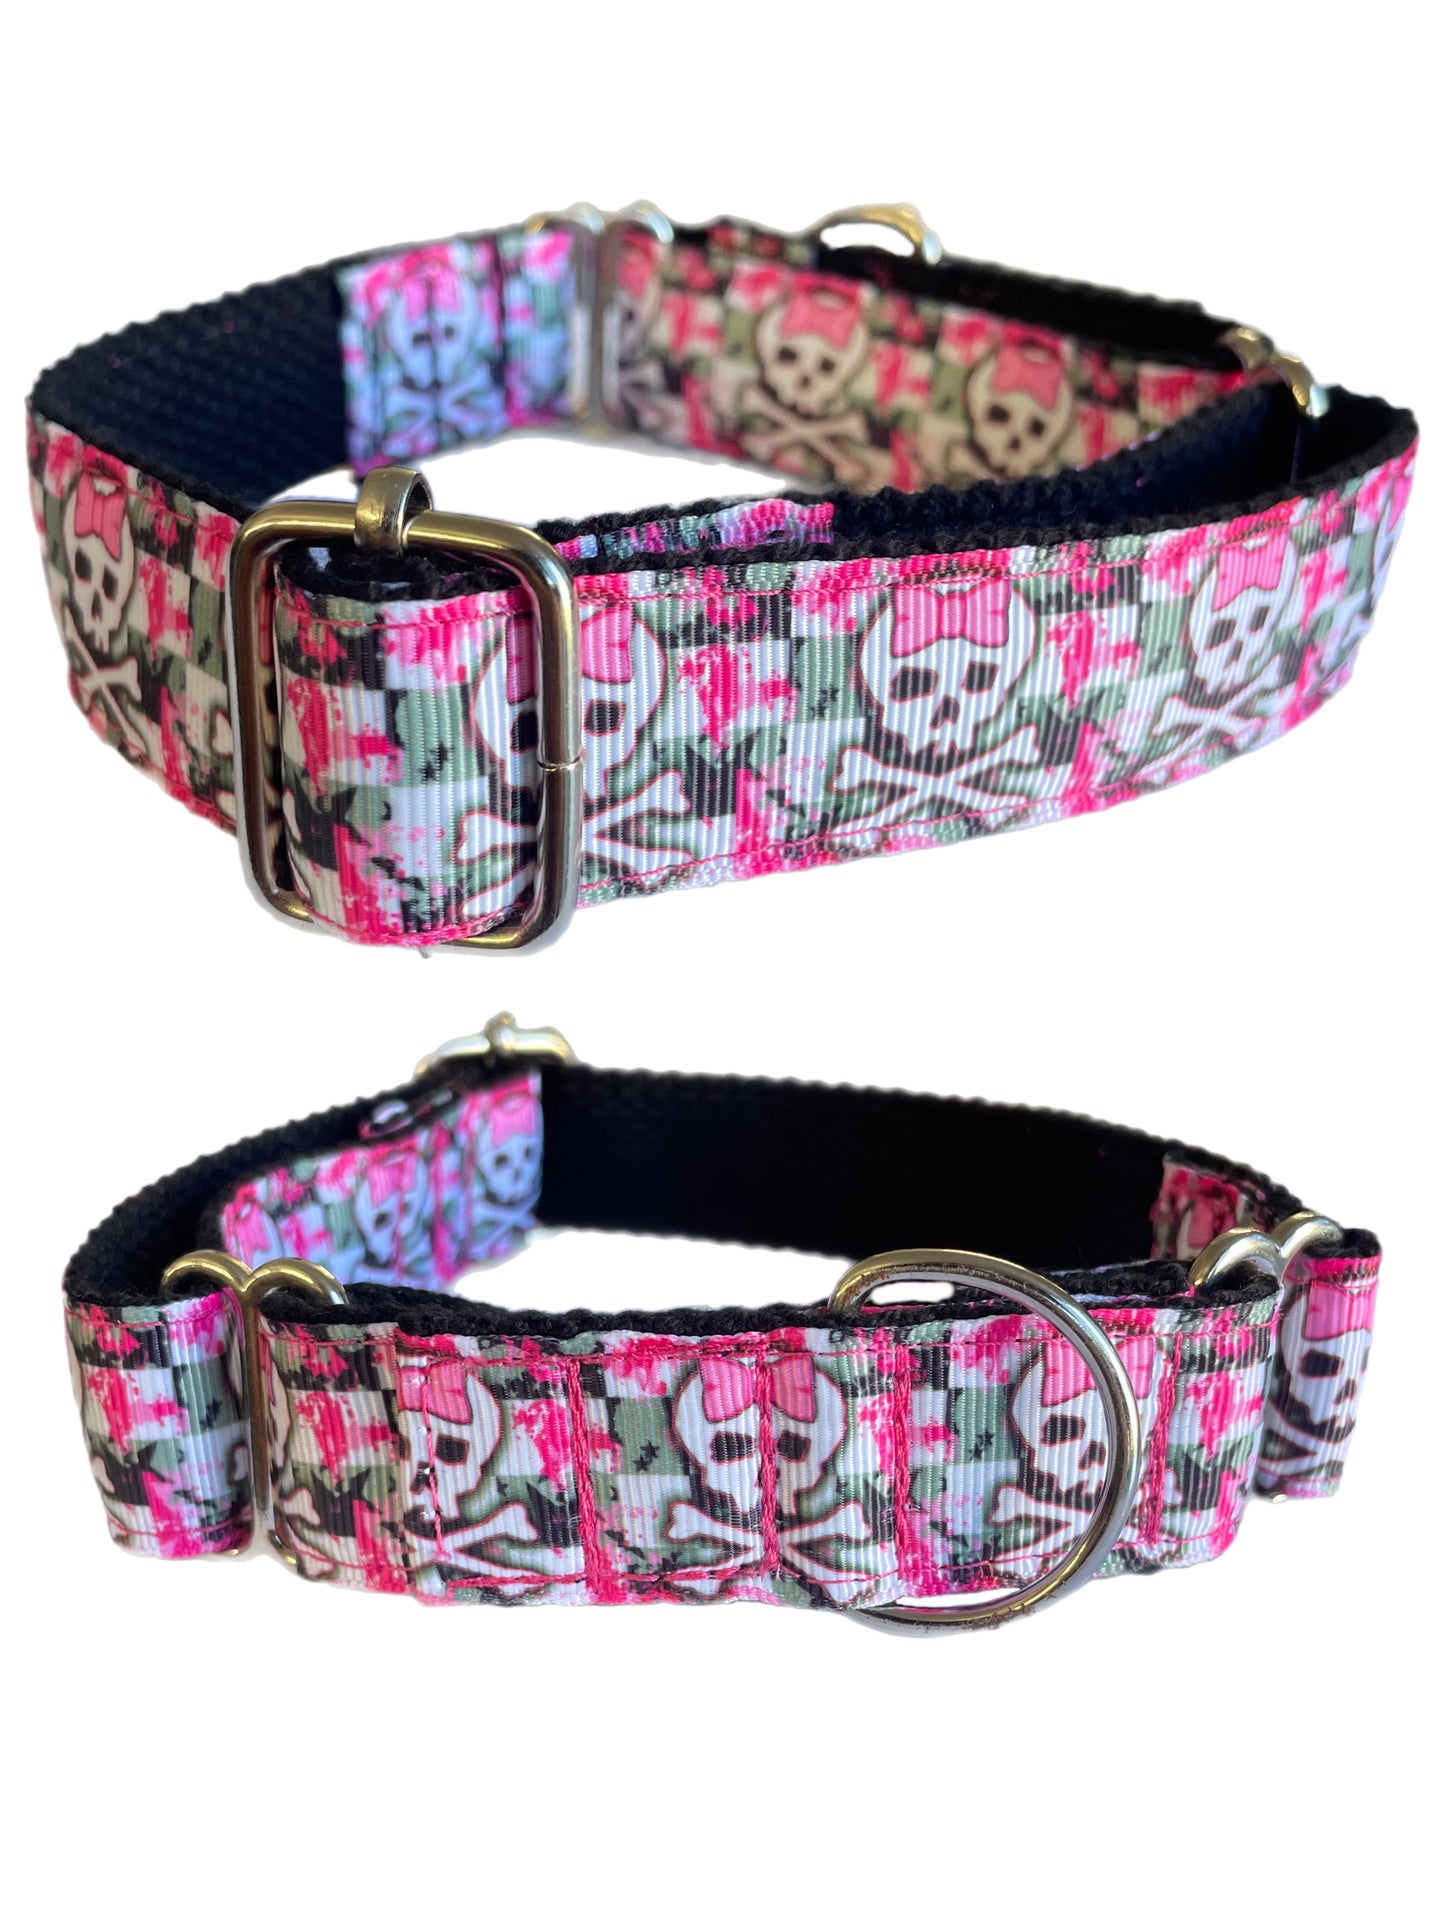 Greyhound Martingale 25mm house collar in pink with cute skulls